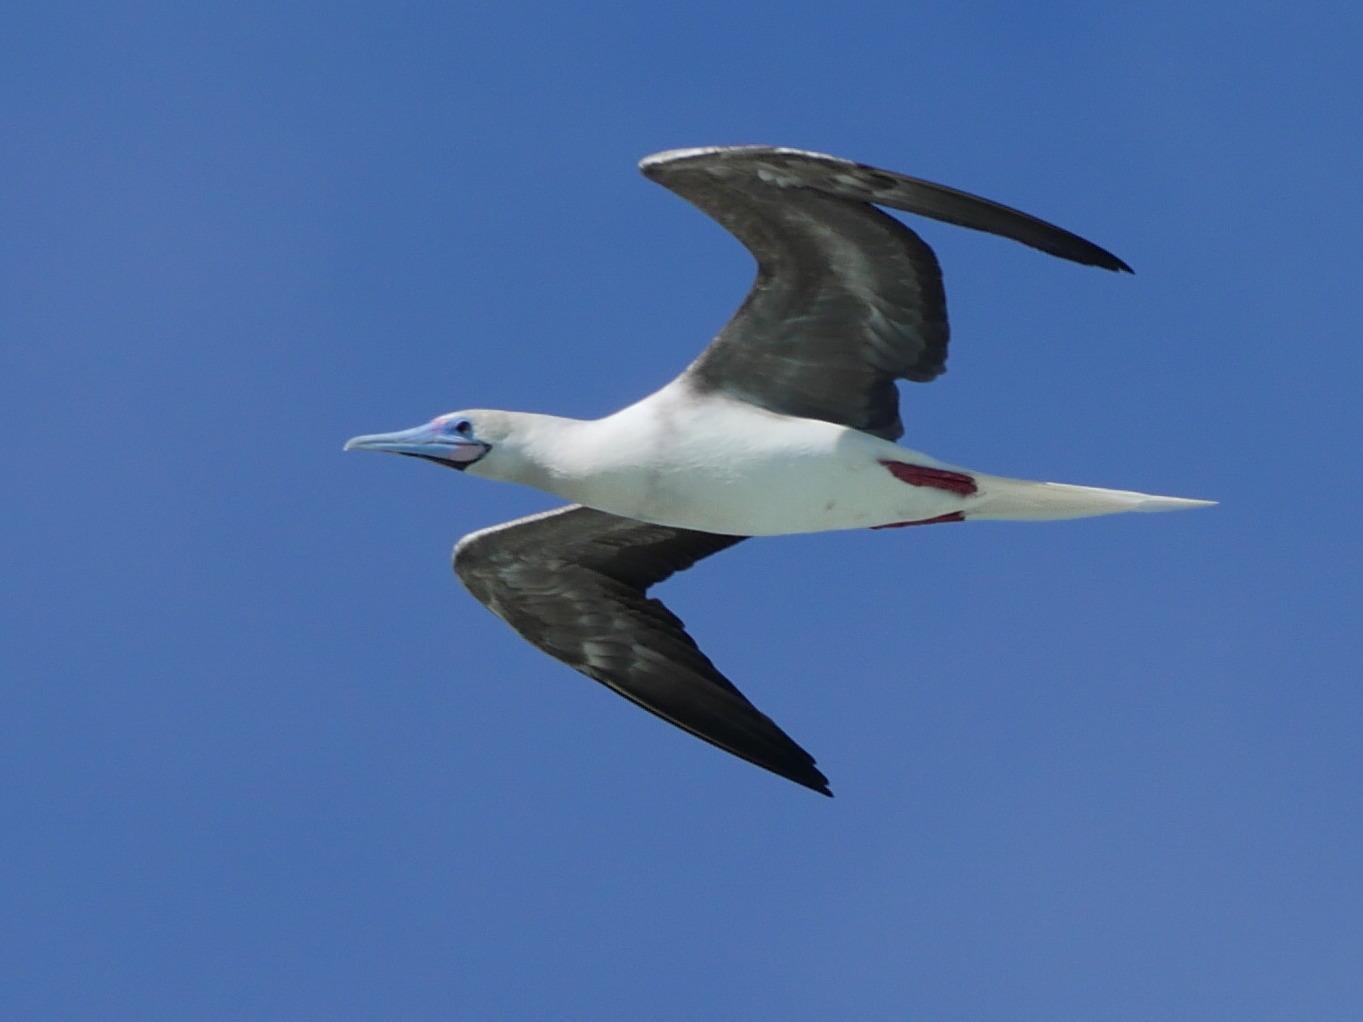 Red-footed Booby Photo by Peter Lowe